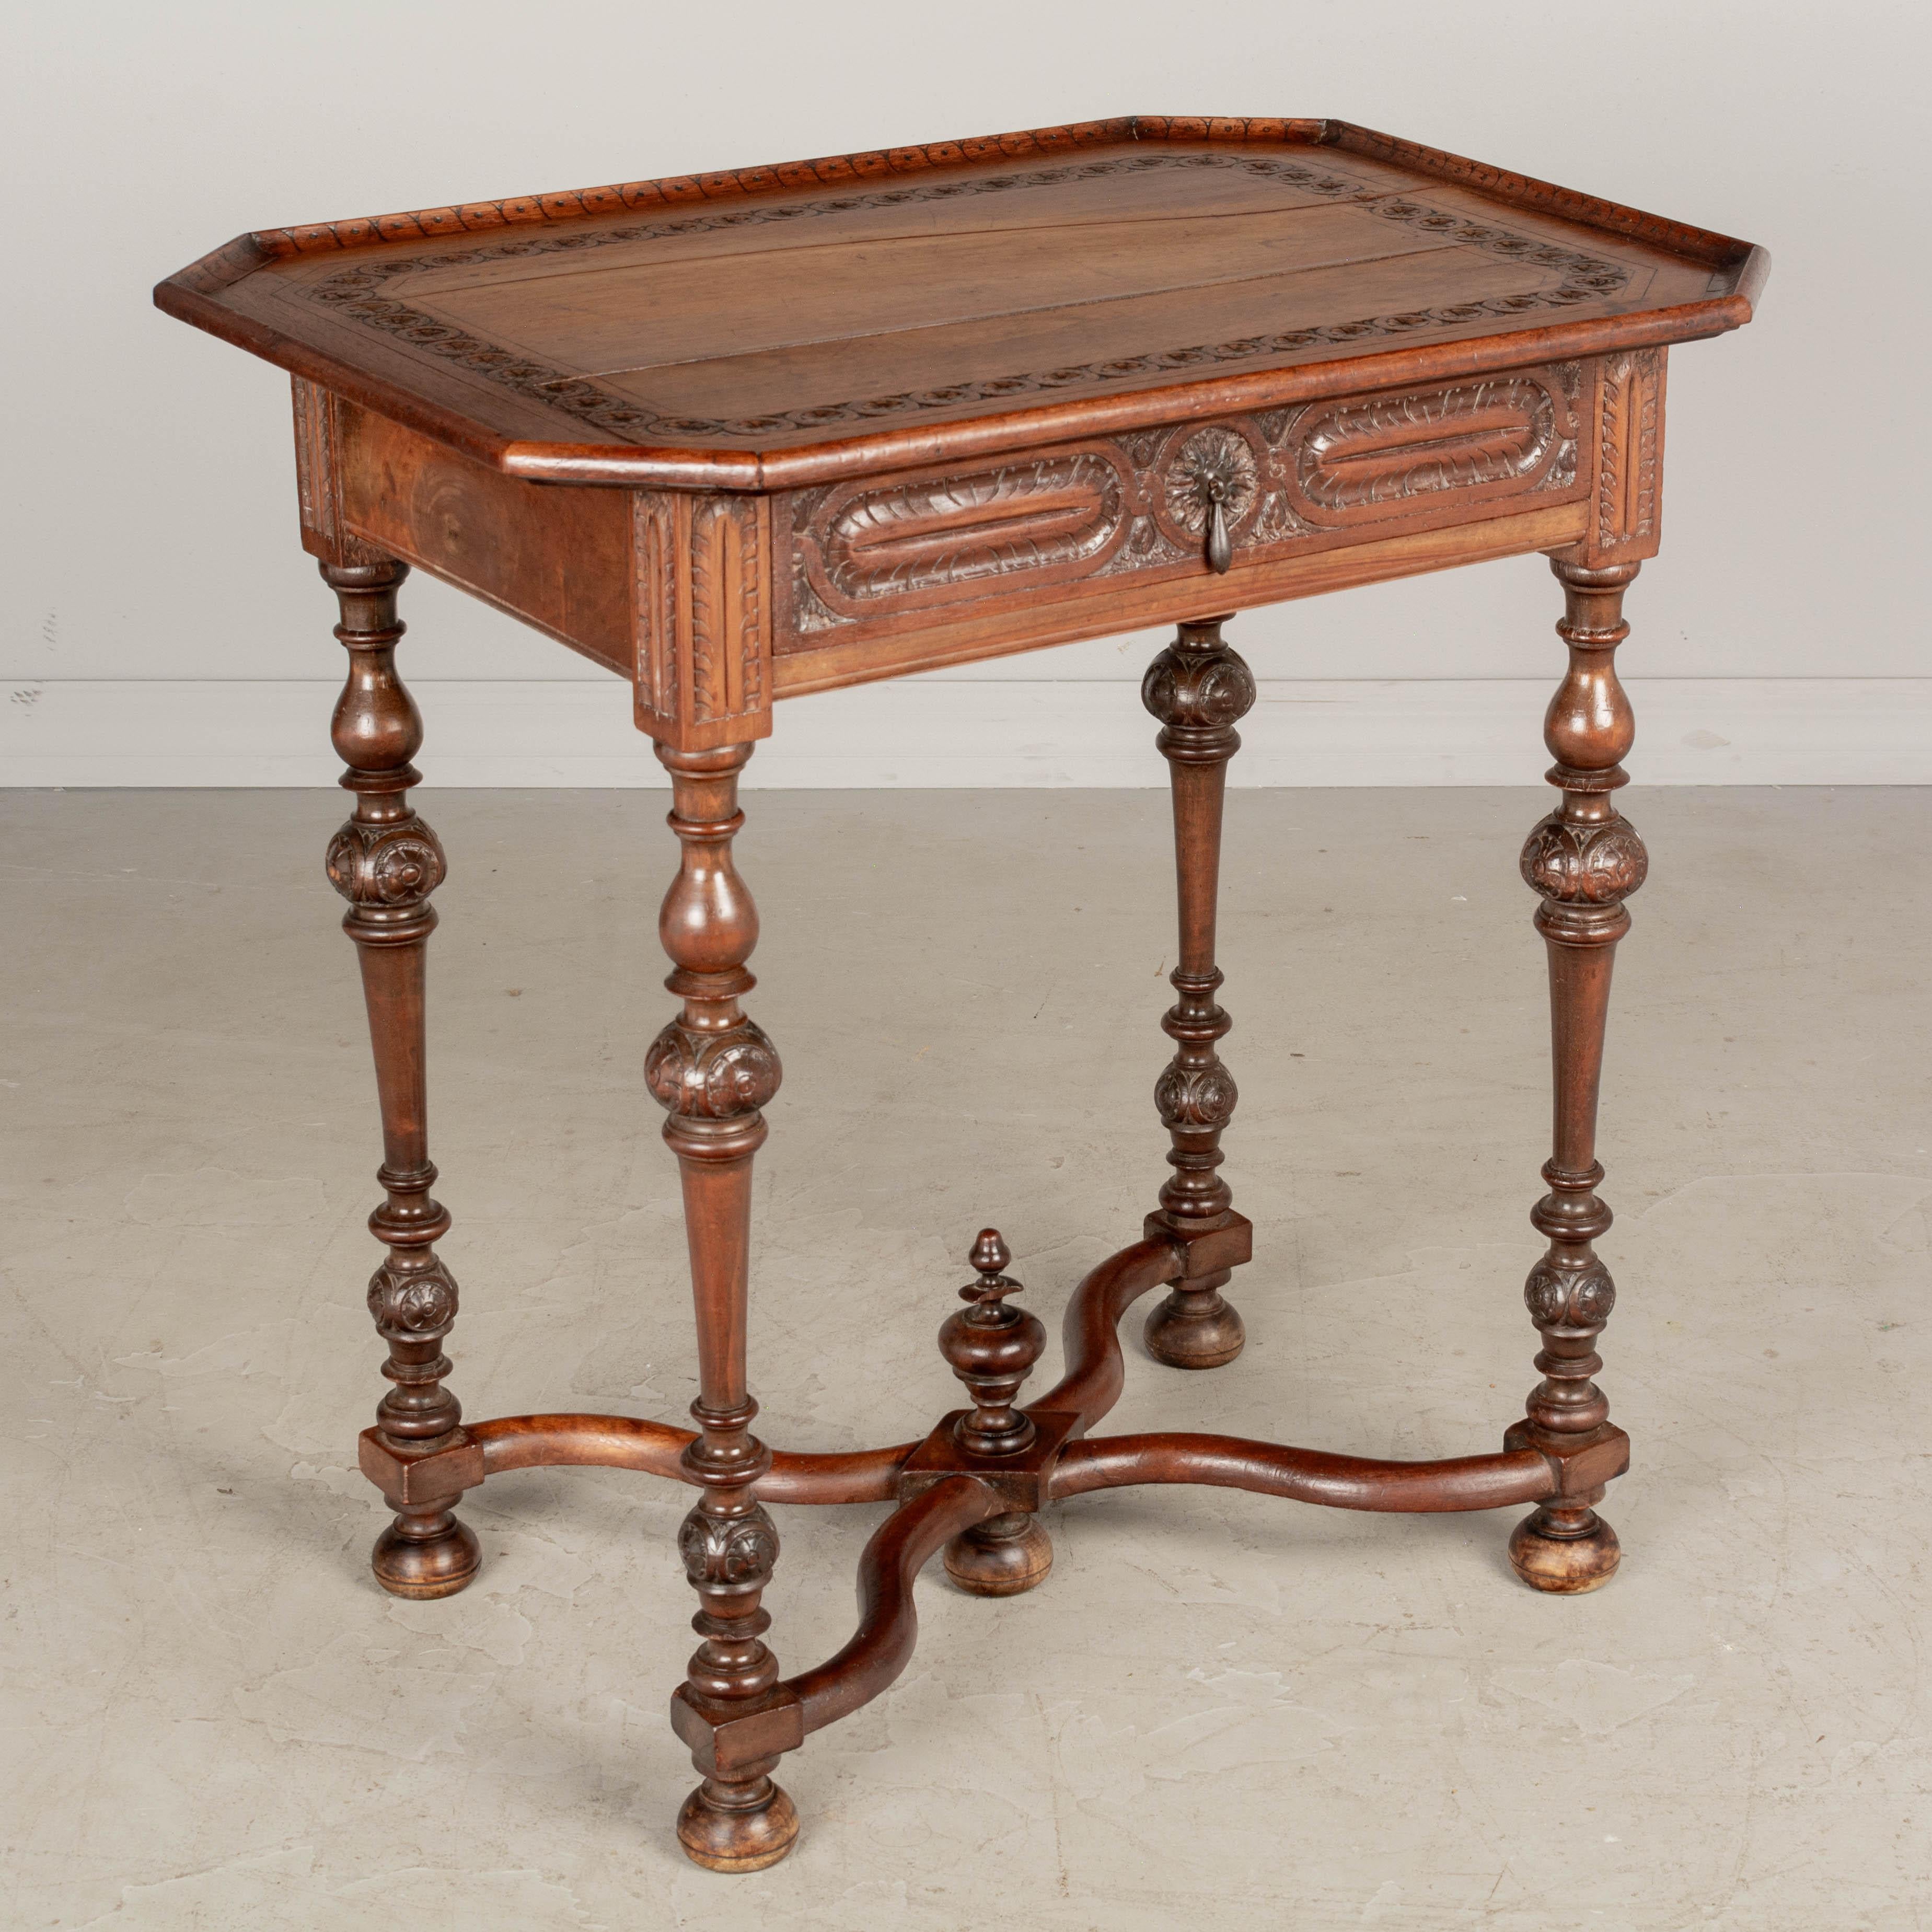 A Louis XVIII style French side table made of solid walnut with carved decoration. Dovetailed drawer with small pull. Turned legs connected by an X-form stretcher with center finial. Pegged construction. Waxed patina. Circa 1920-1940. Dimensions: